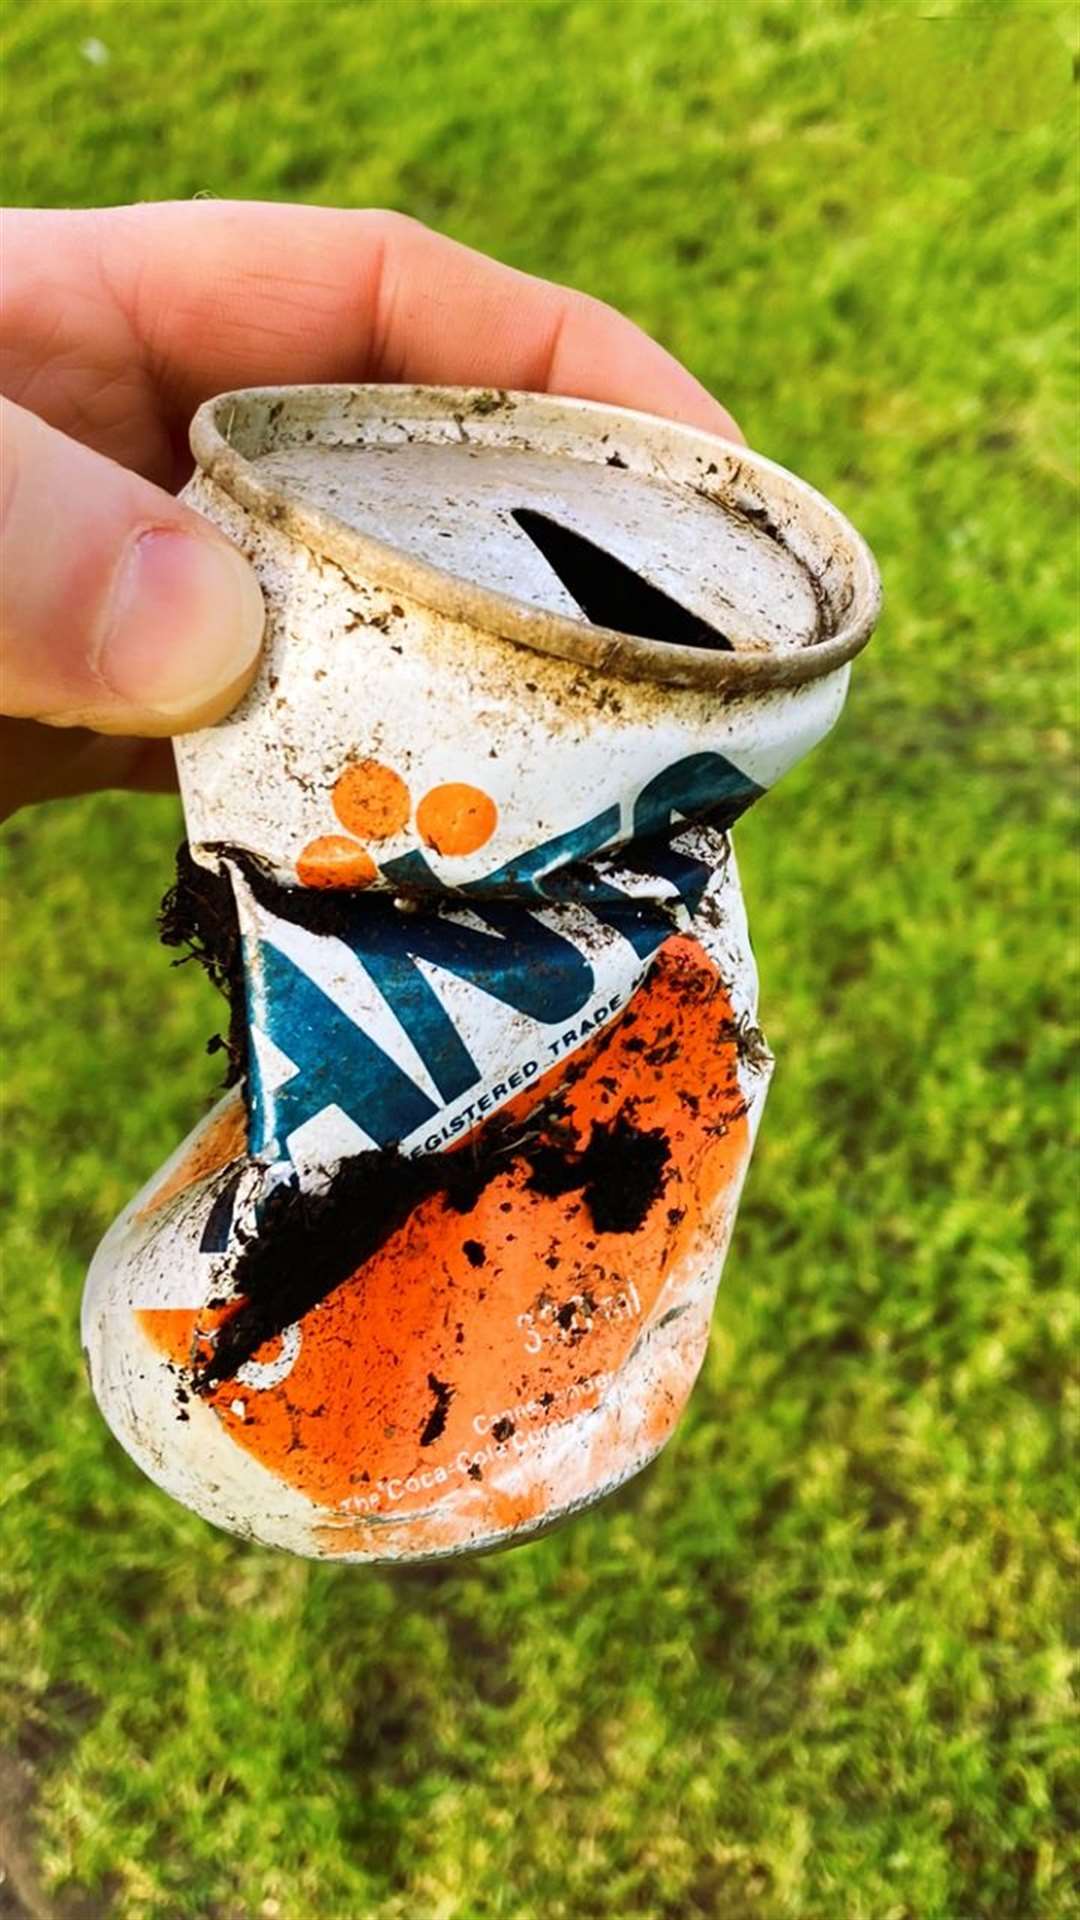 Fanta can found by Allan Bruce during the Wick riverside litter pick on Sunday. The type of ring-pull on the can was changed in 1989 and shows how long-lived some types of rubbish can be.